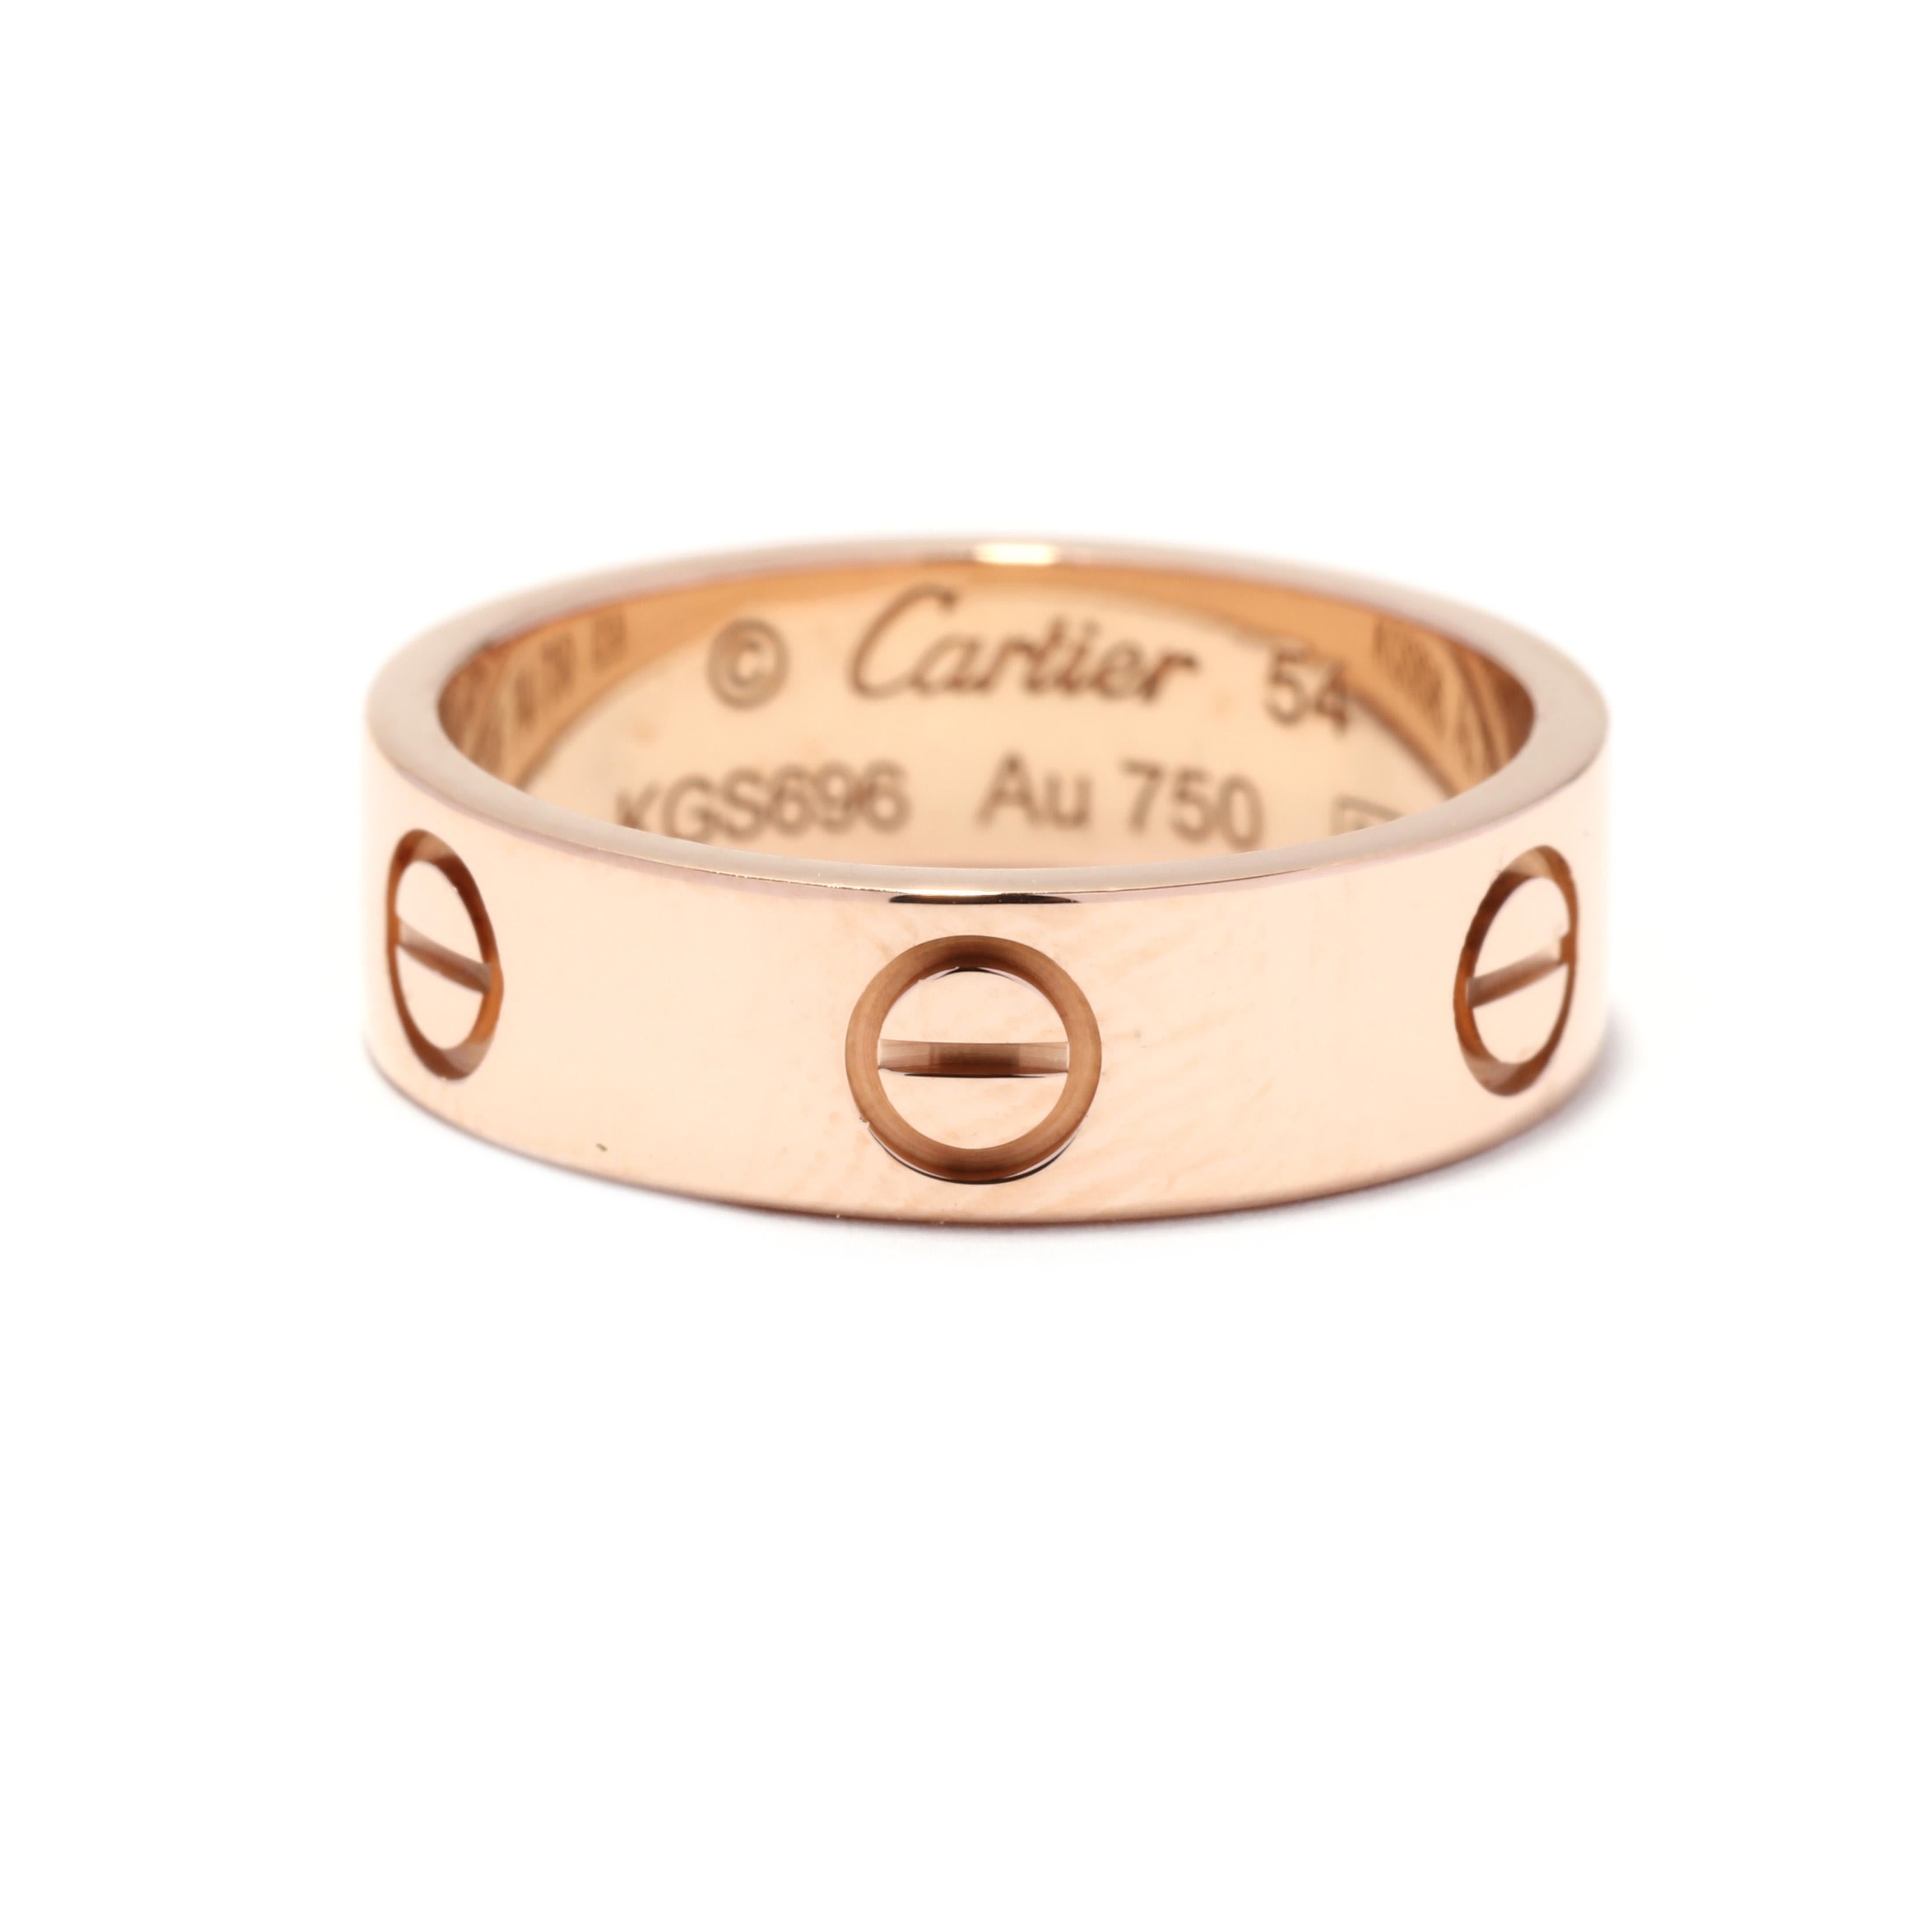 A vintage 18 karat gold wedding band design by Cartier for the 'Love' collection. This ring features an eternity design with screw top motifs. Please note that this ring is accompanied with the original Cartier box and bag.

Ring Size 6.75 US; 54